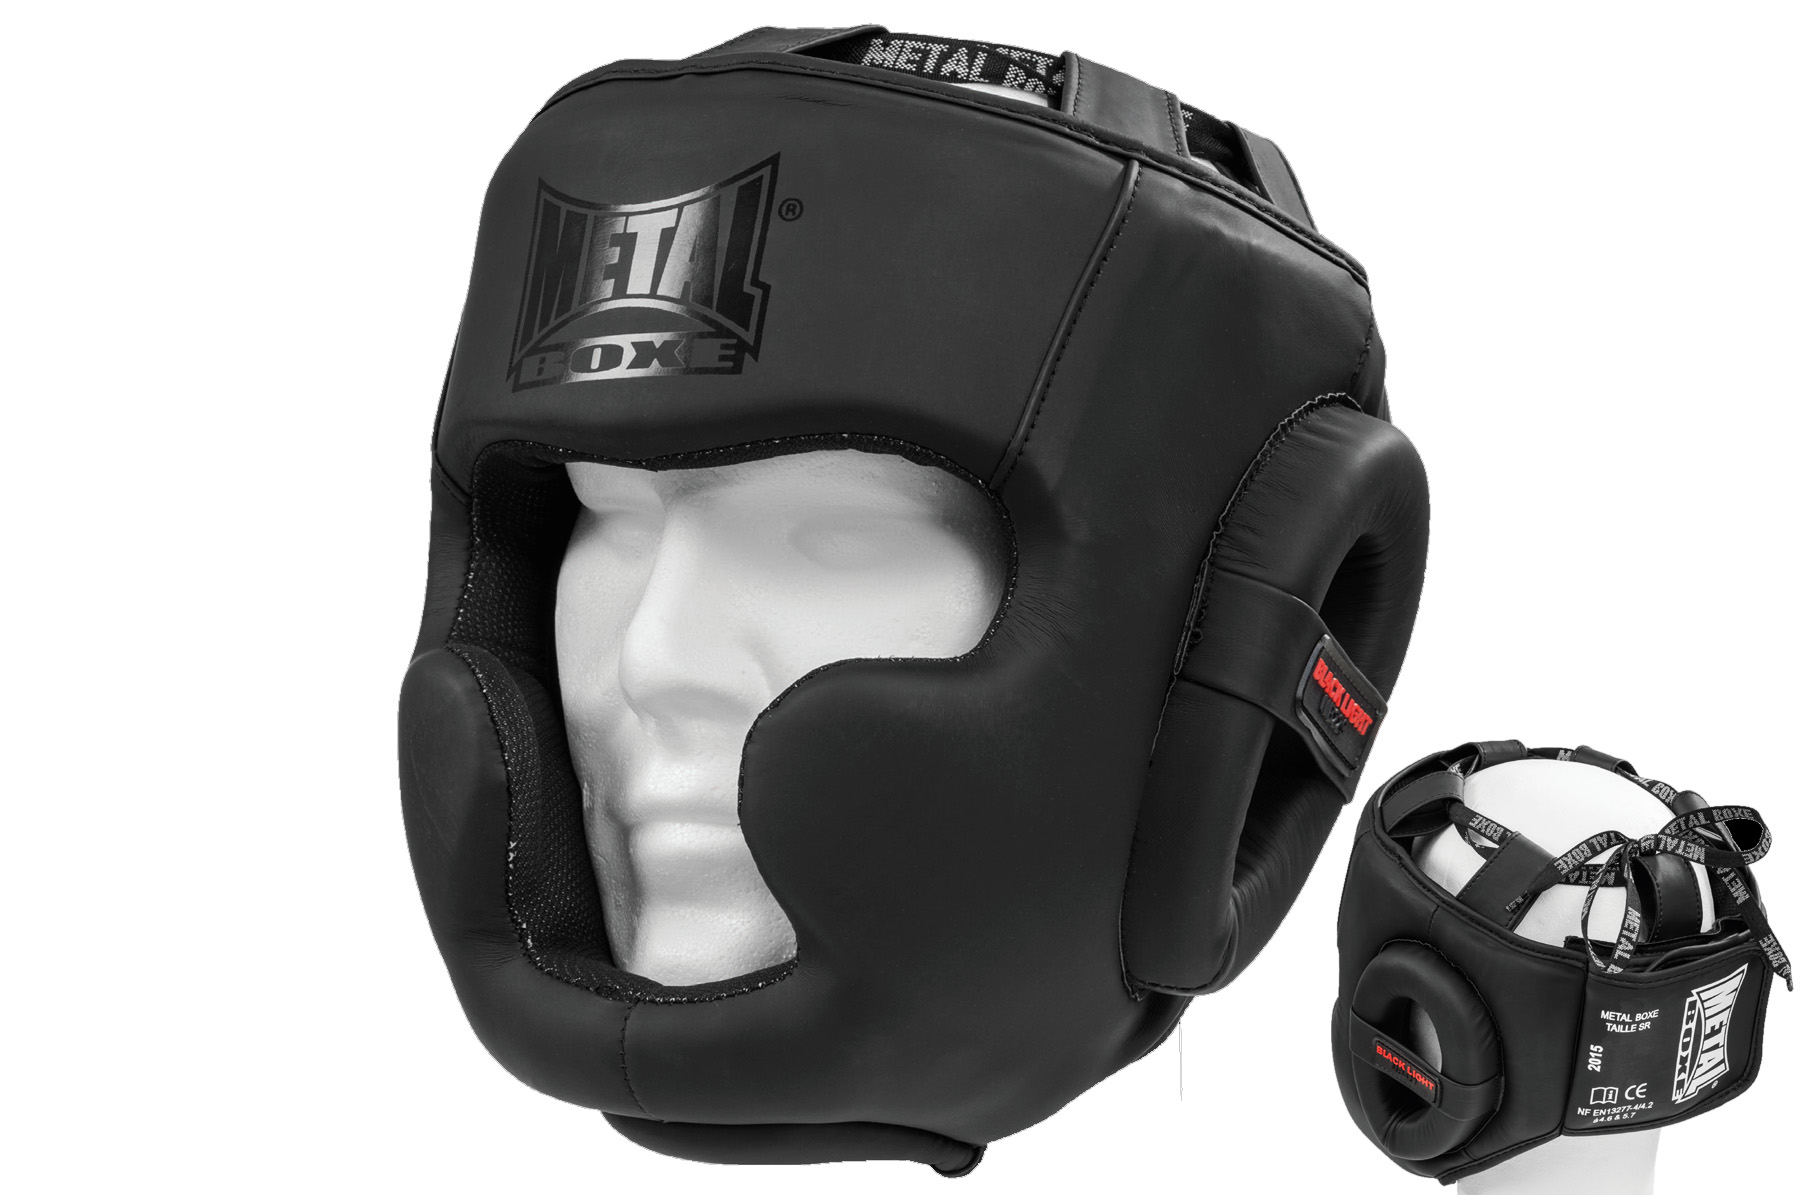  METAL BOXE MB213 Shield Unisex, Unisex, MB213,  Black/White/Red, Size M : Sports & Outdoors